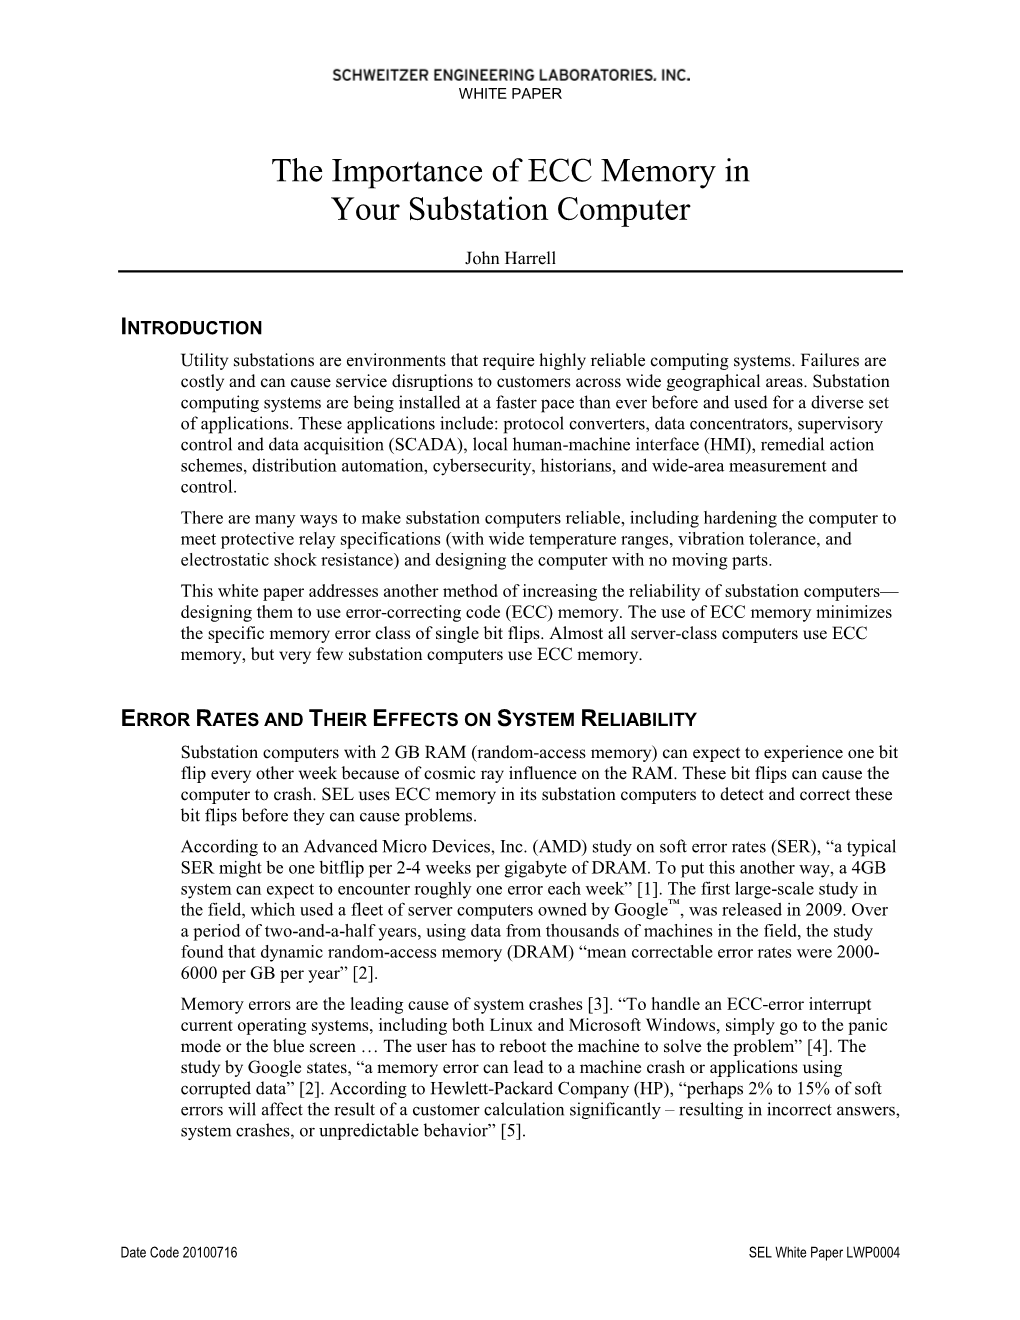 The Importance of ECC Memory in Your Substation Computer